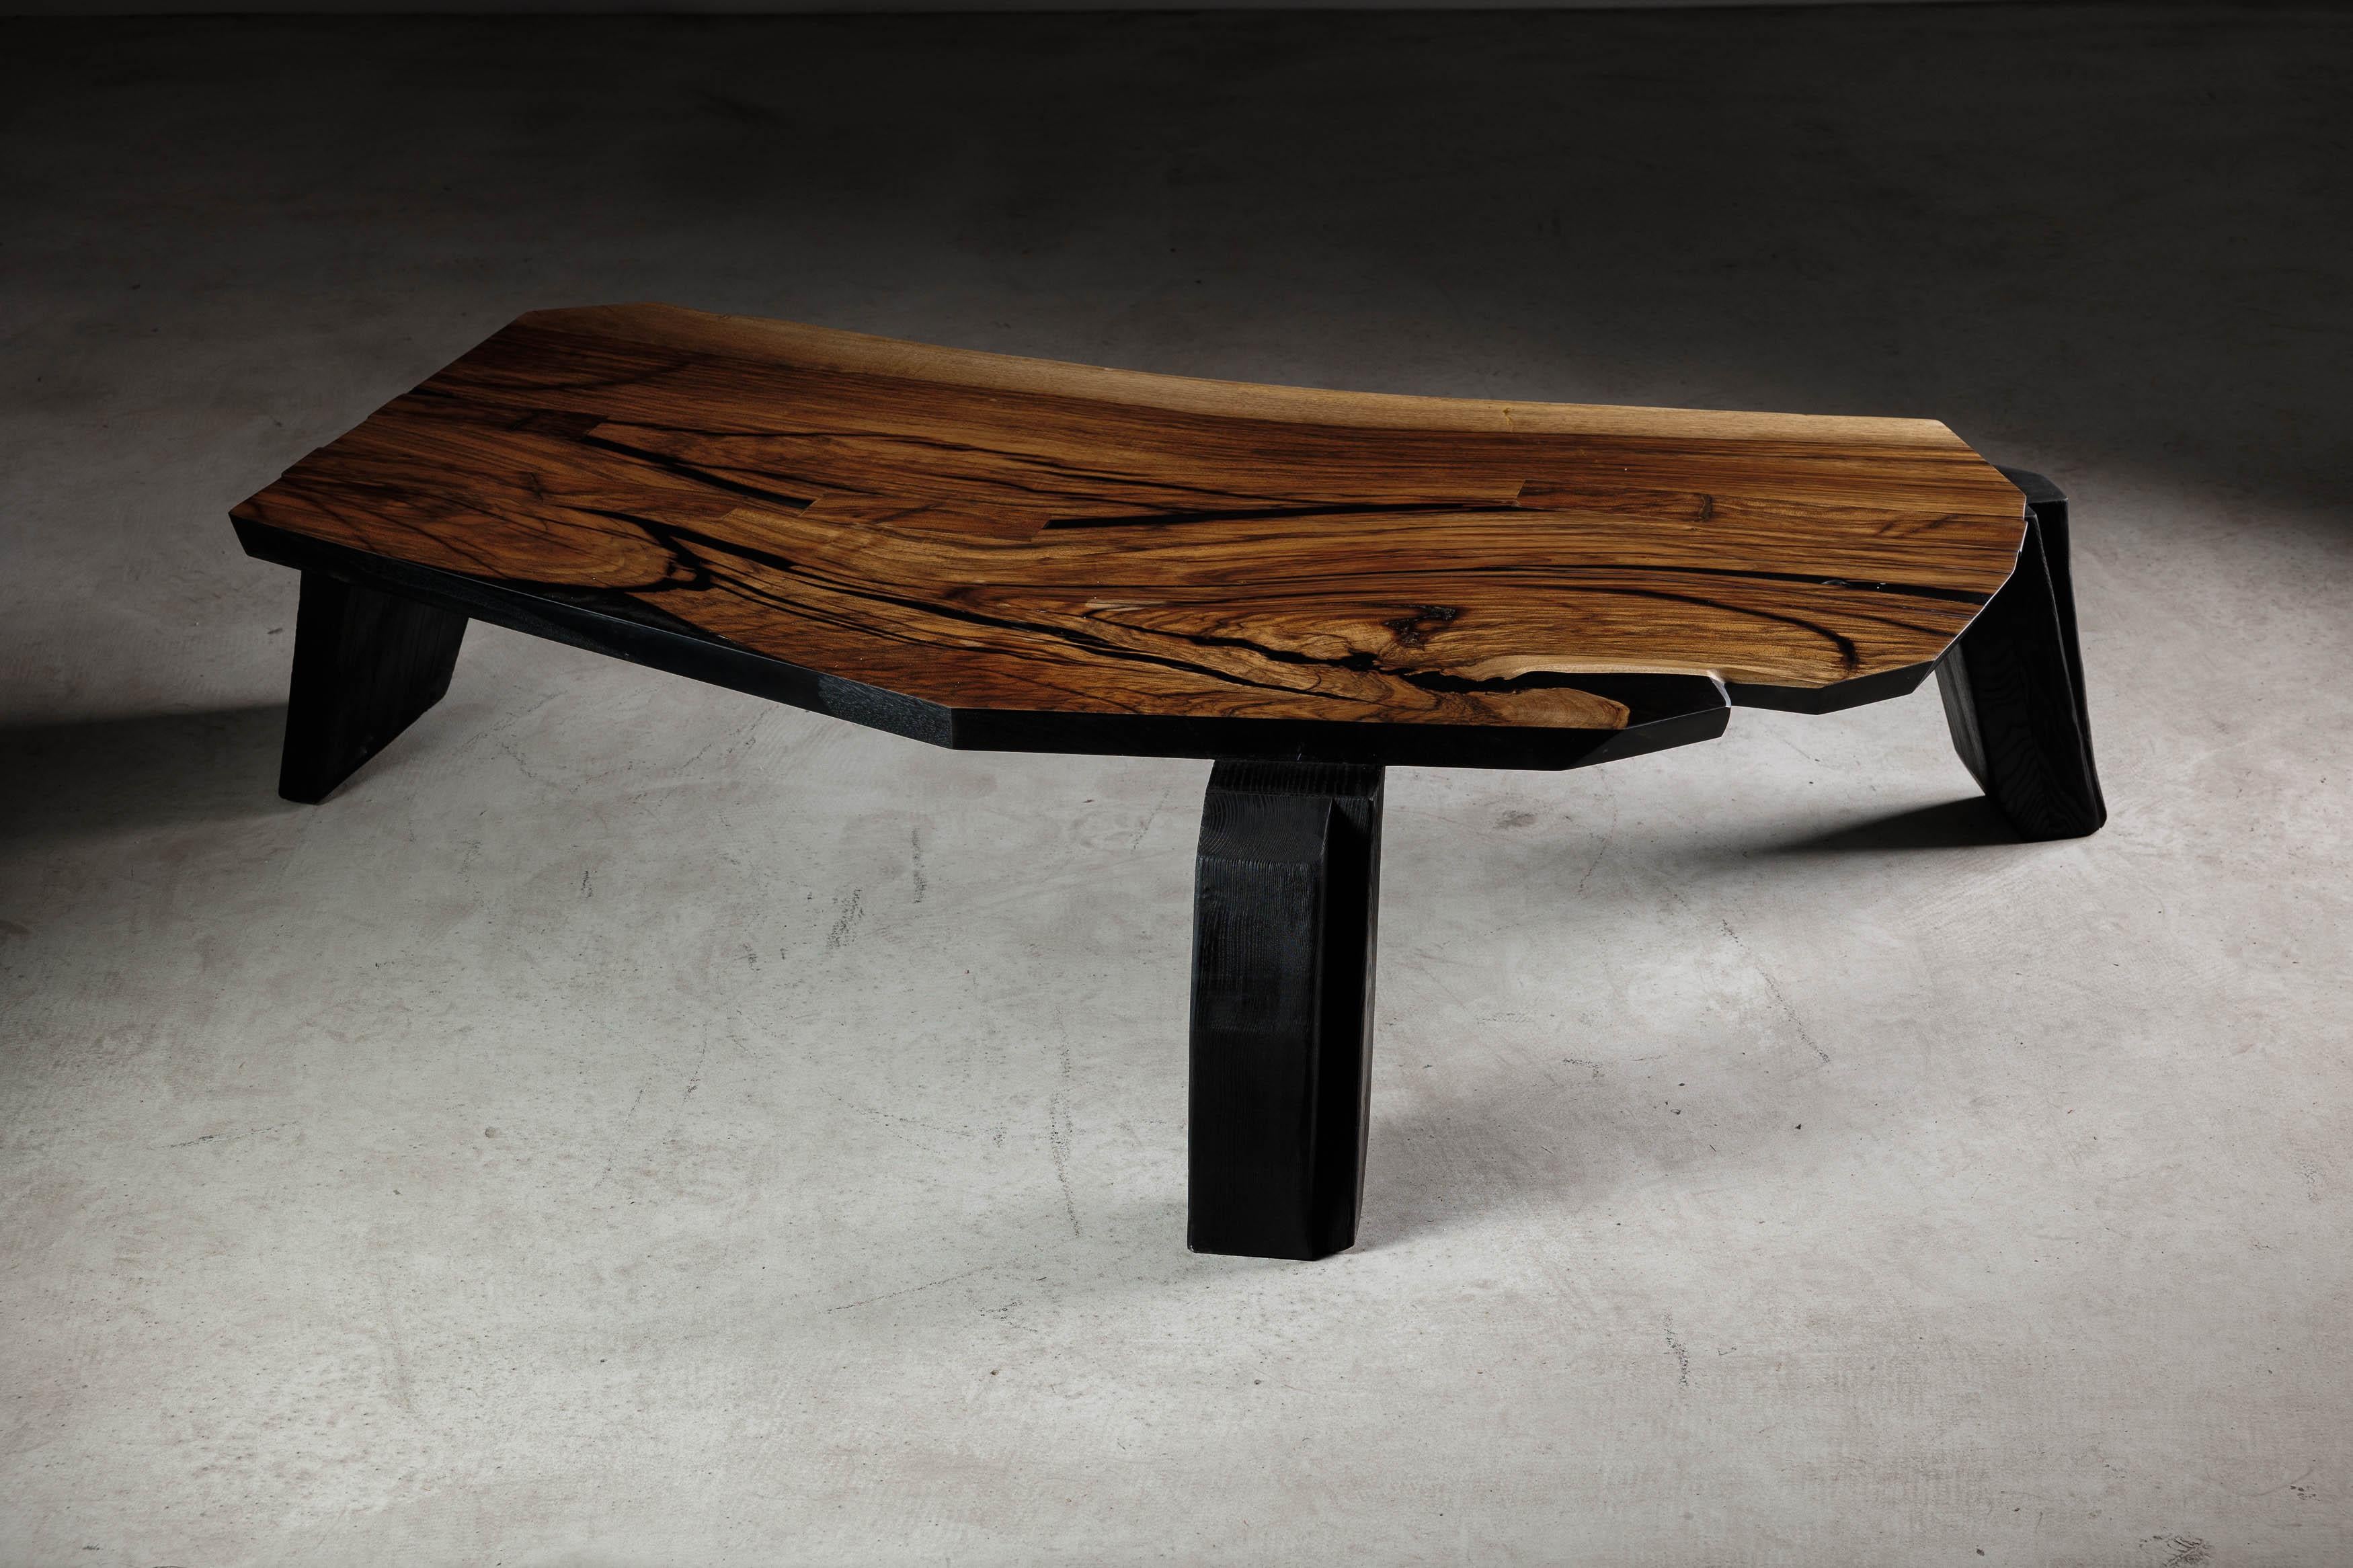 EM102 coffee table by Eero Moss
One of a kind
Dimensions; W 136 x D 74 x H 35 cm
Materials: Walnut, charred ash, India ink.
Finish: Natural oils.

18 Brut Collection

The latest collection by the artist is a tribute to the Brutalist